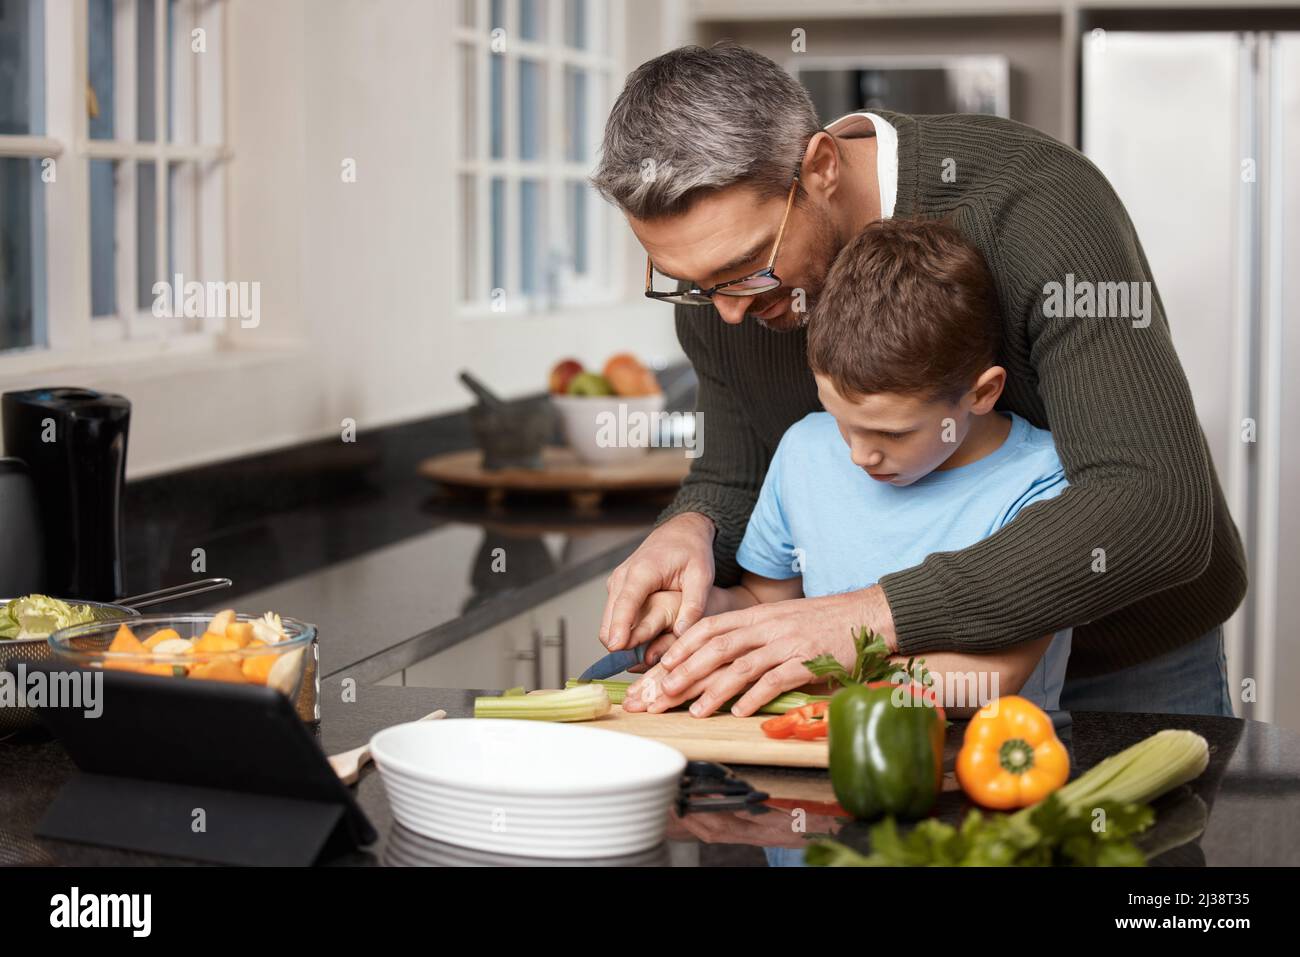 You have to be very careful not to cut yourself. Shot of a little boy cooking with his father at home. Stock Photo